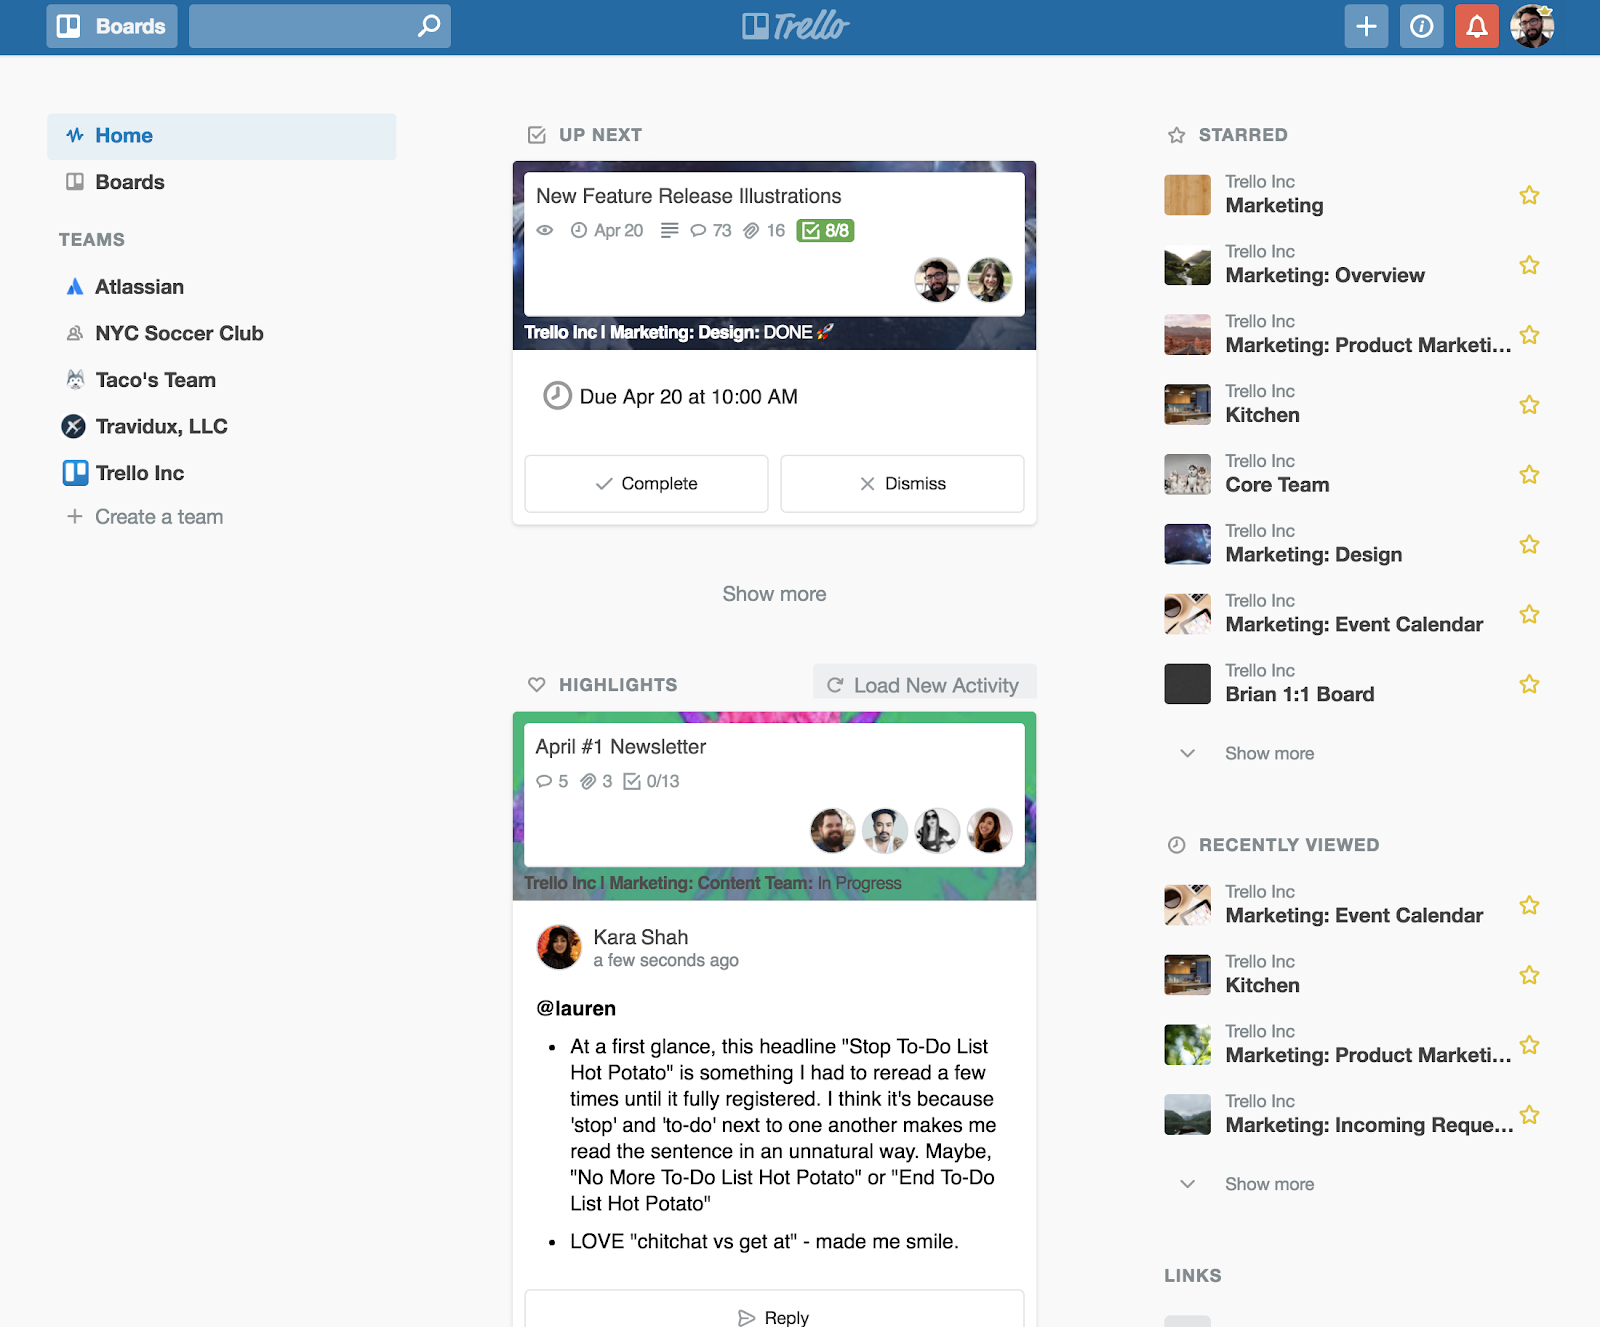 Overview of the Trello Home Page with various fields